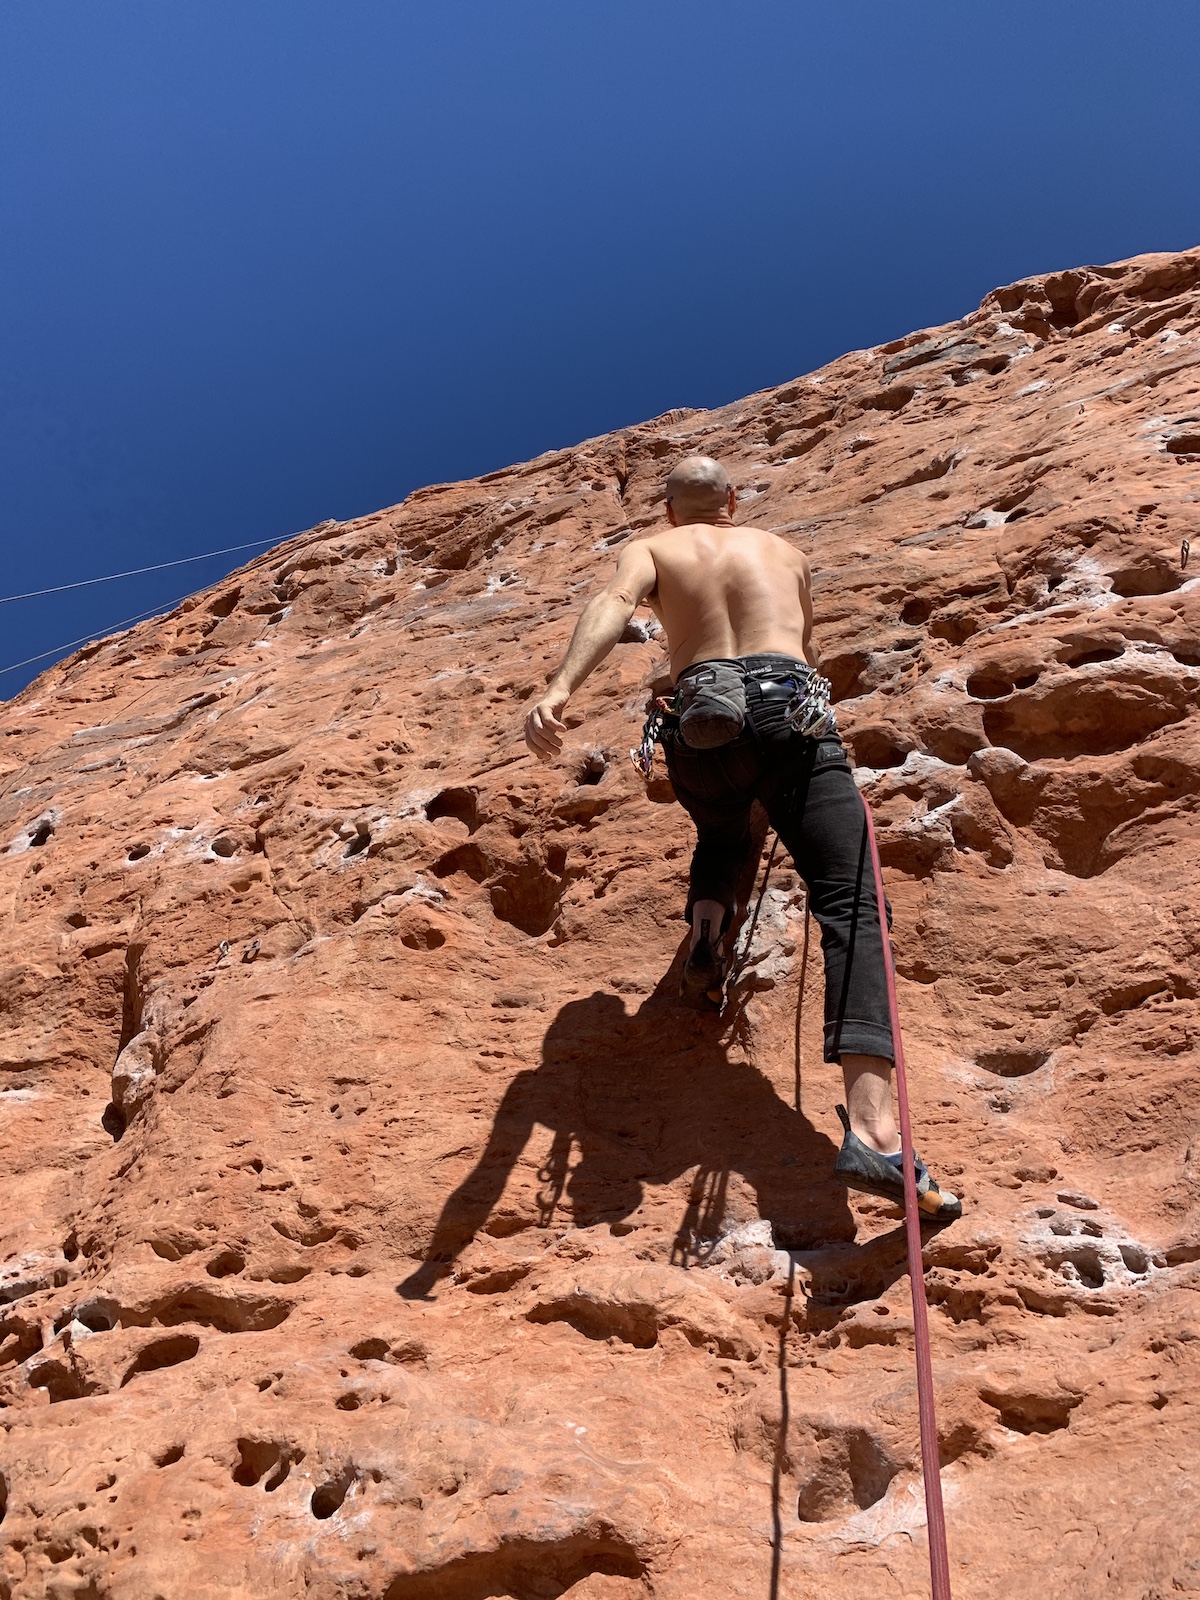 The author climbs confidently at the Chuckawalla Wall near St. George, Utah, knowing his partner below is using the Trango Vergo. [Photo] Catherine Houston